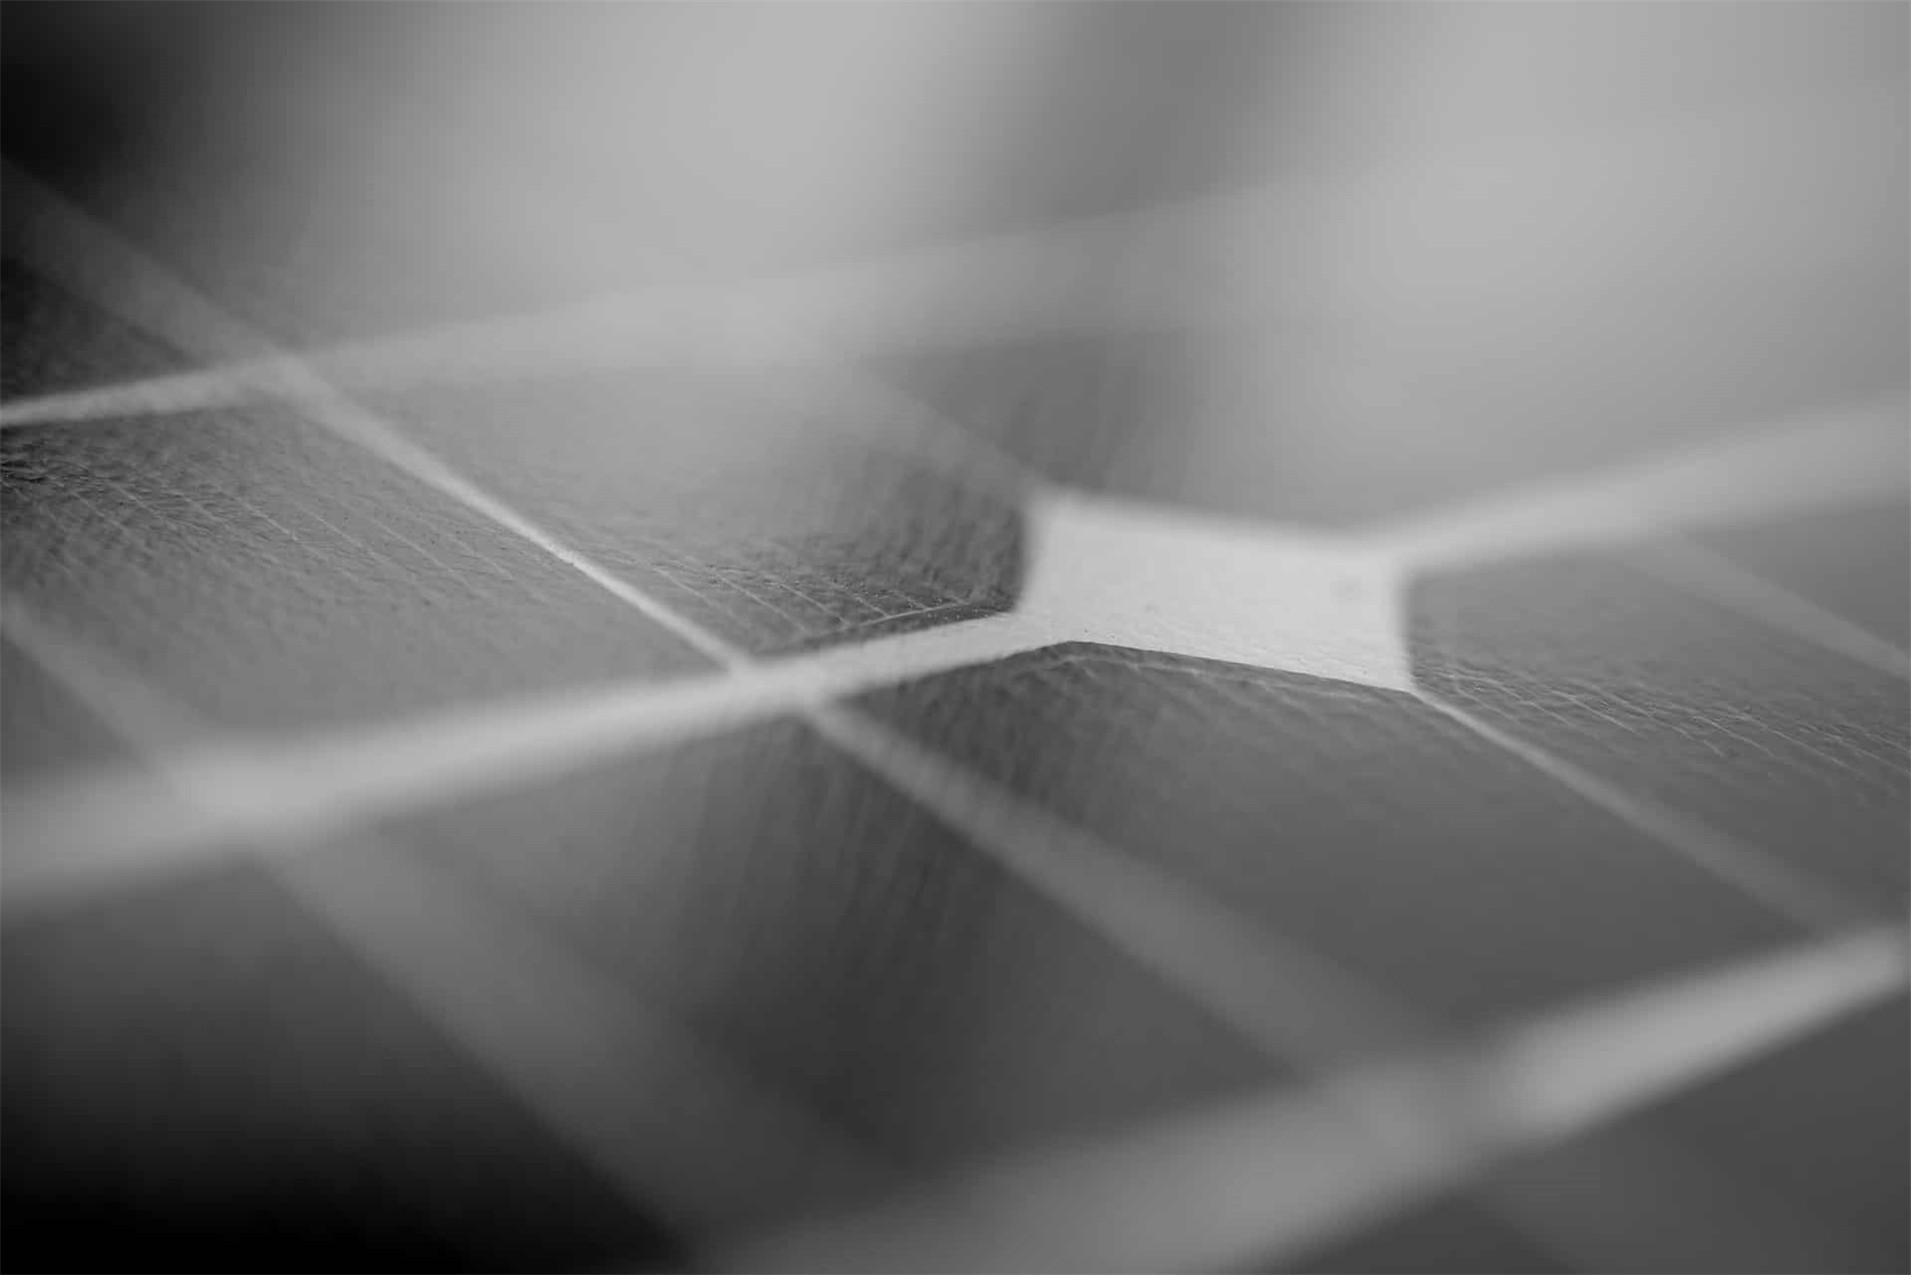 Chinese PV Industry Brief: JA Solar commissions 3.5 GW module factory in Shanghai